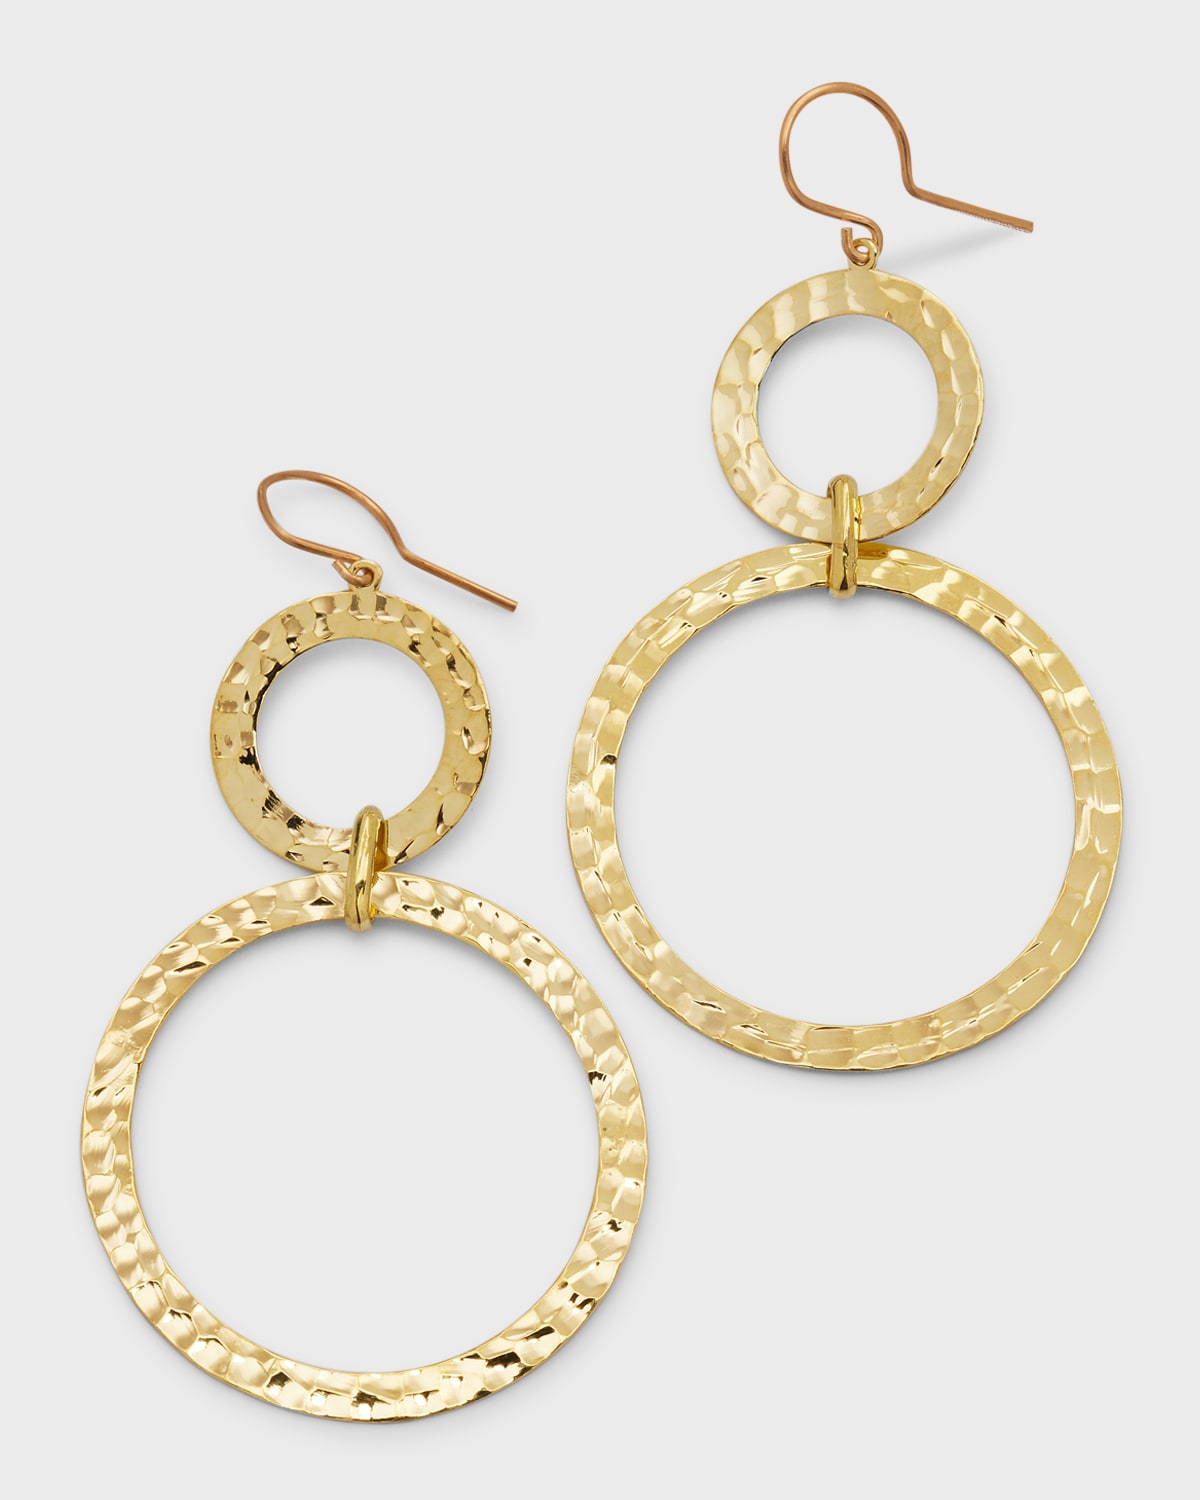 Hammered Gold Earrings | Neiman Marcus